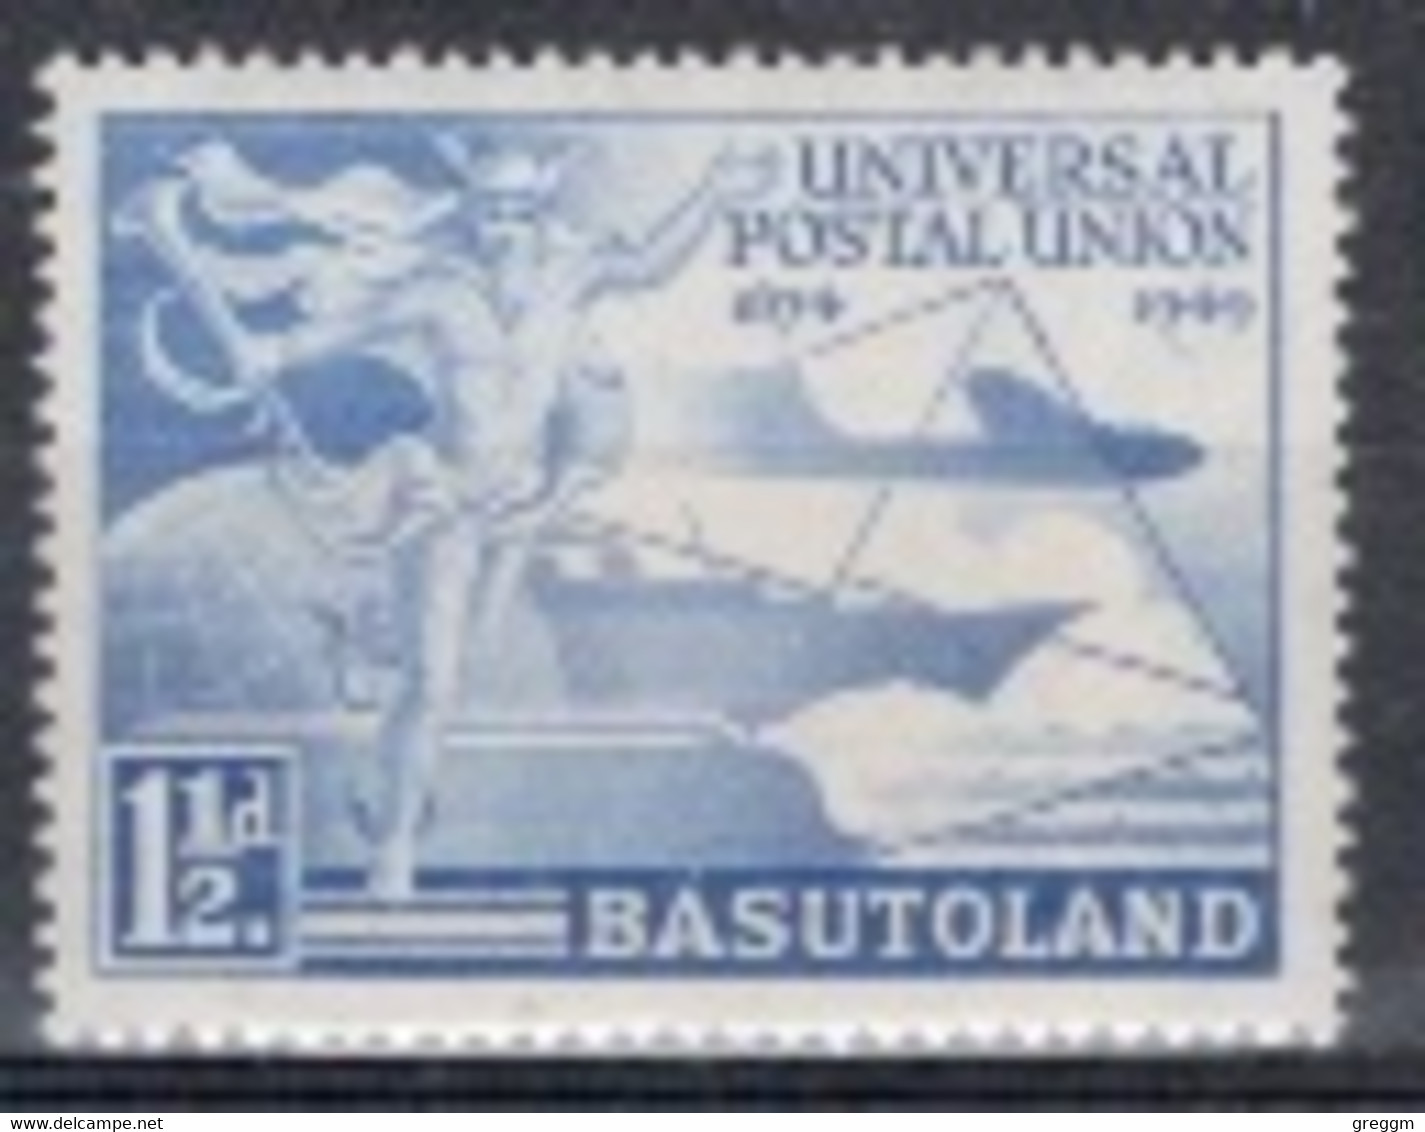 Basutoland 1949 Single 1½d Stamp From The UPU Set In Mounted Mint. - 1965-1966 Interne Autonomie